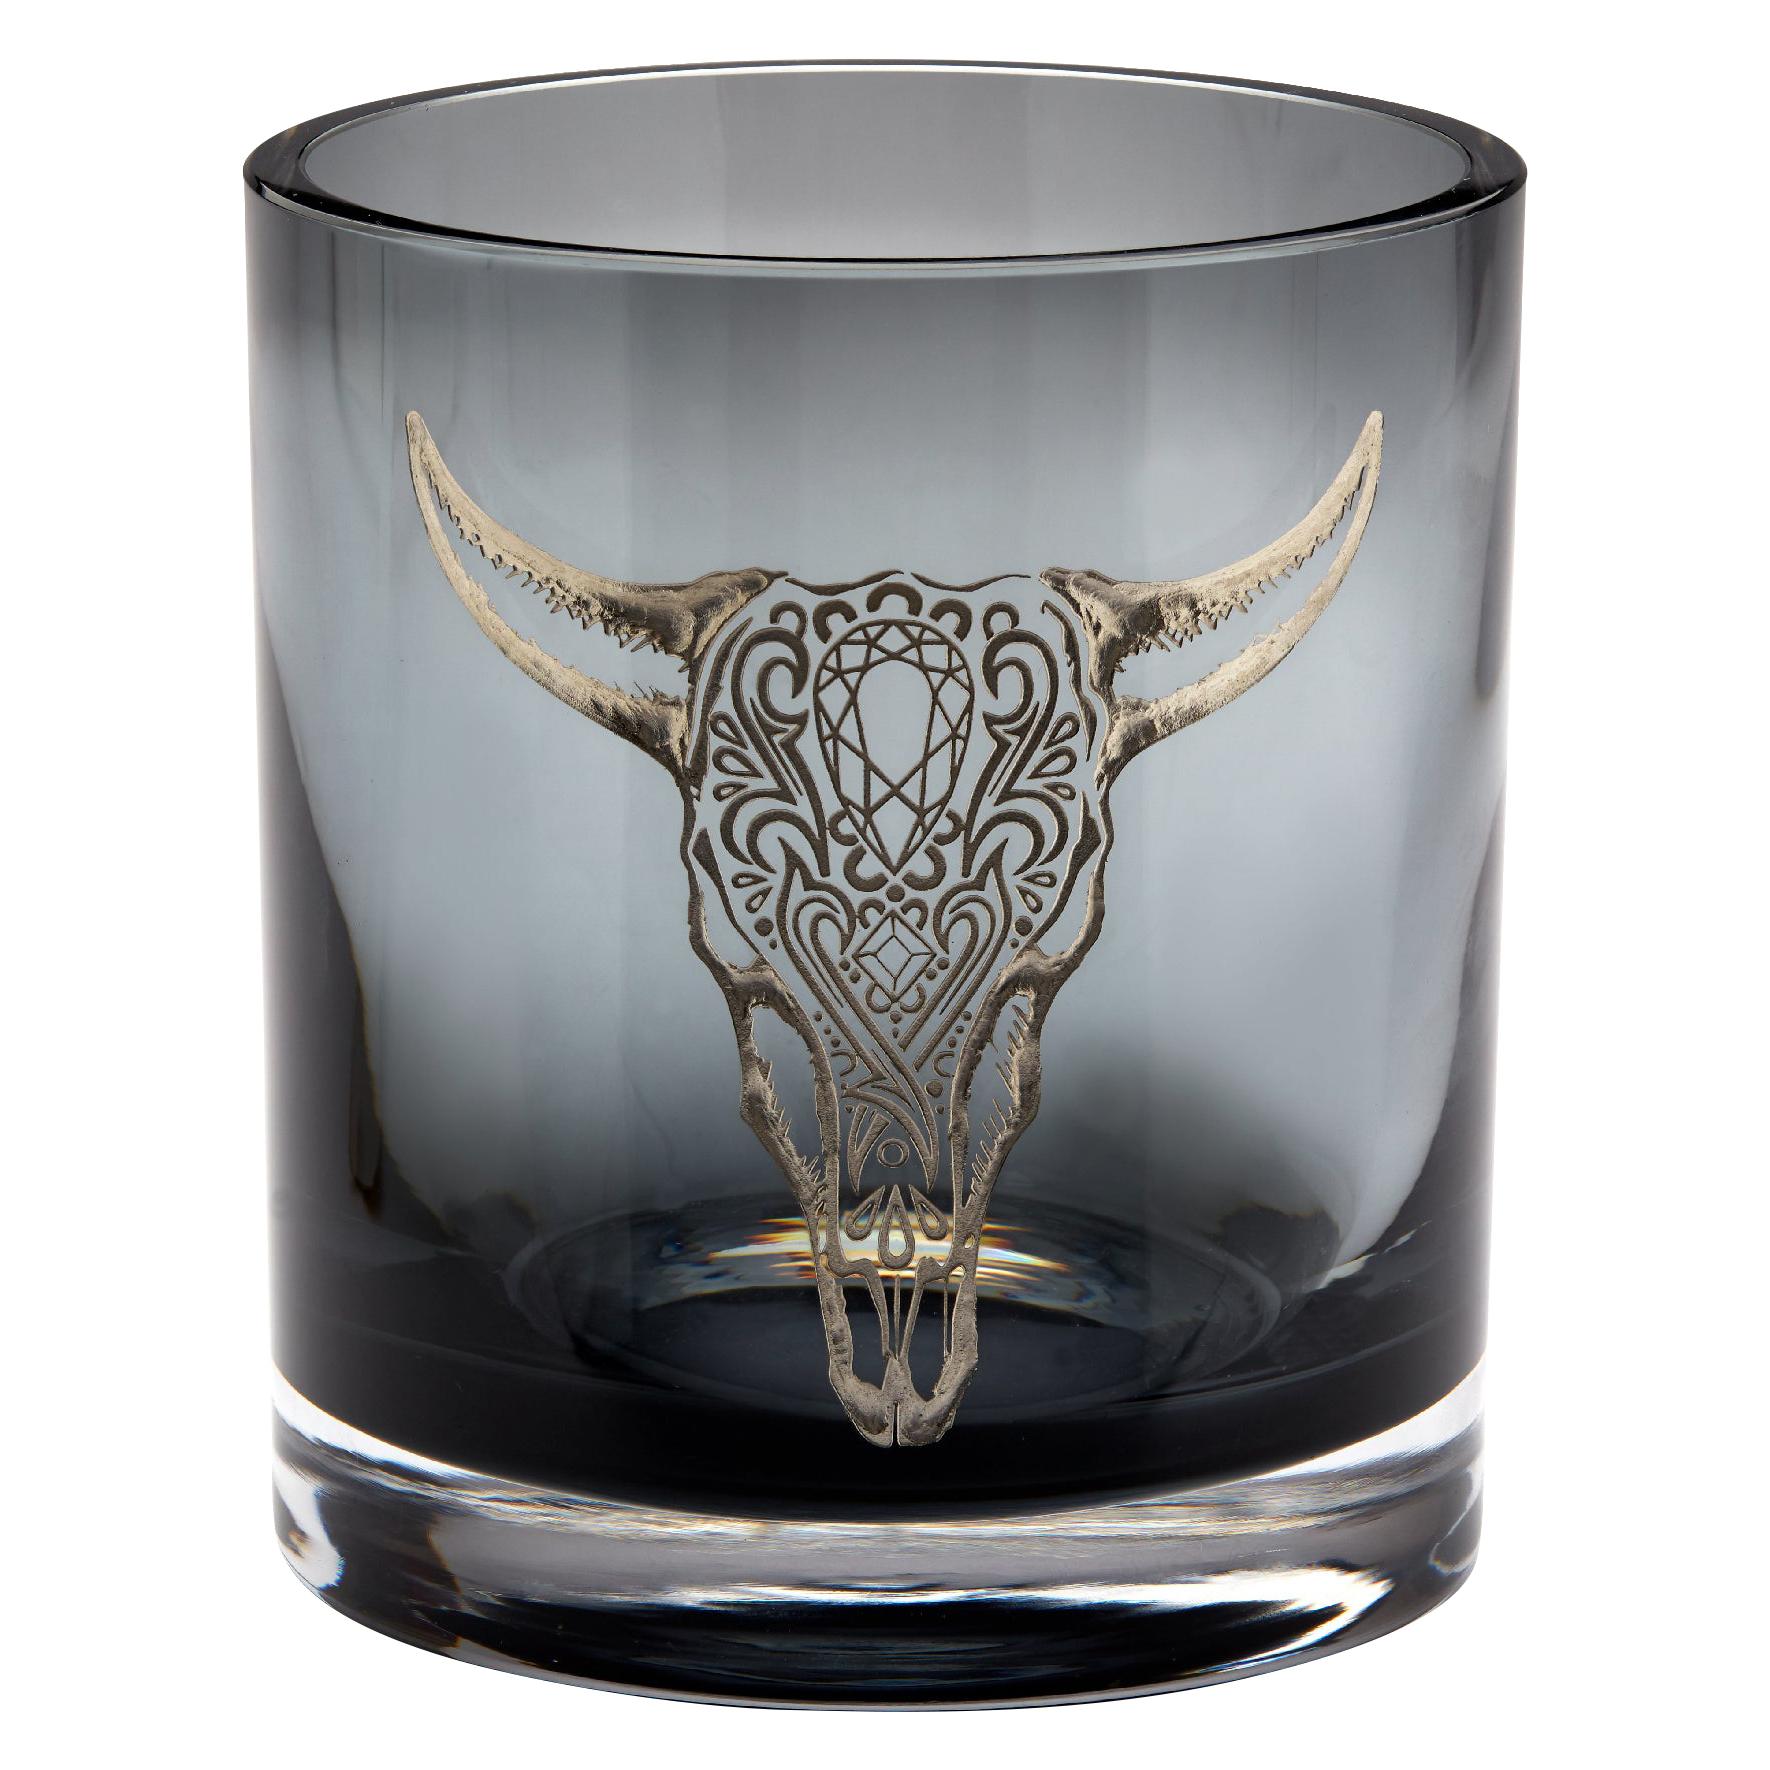 Stephen Webster Tequila Lore Cow Engraved Detail Smoke Colored Ice Bucket